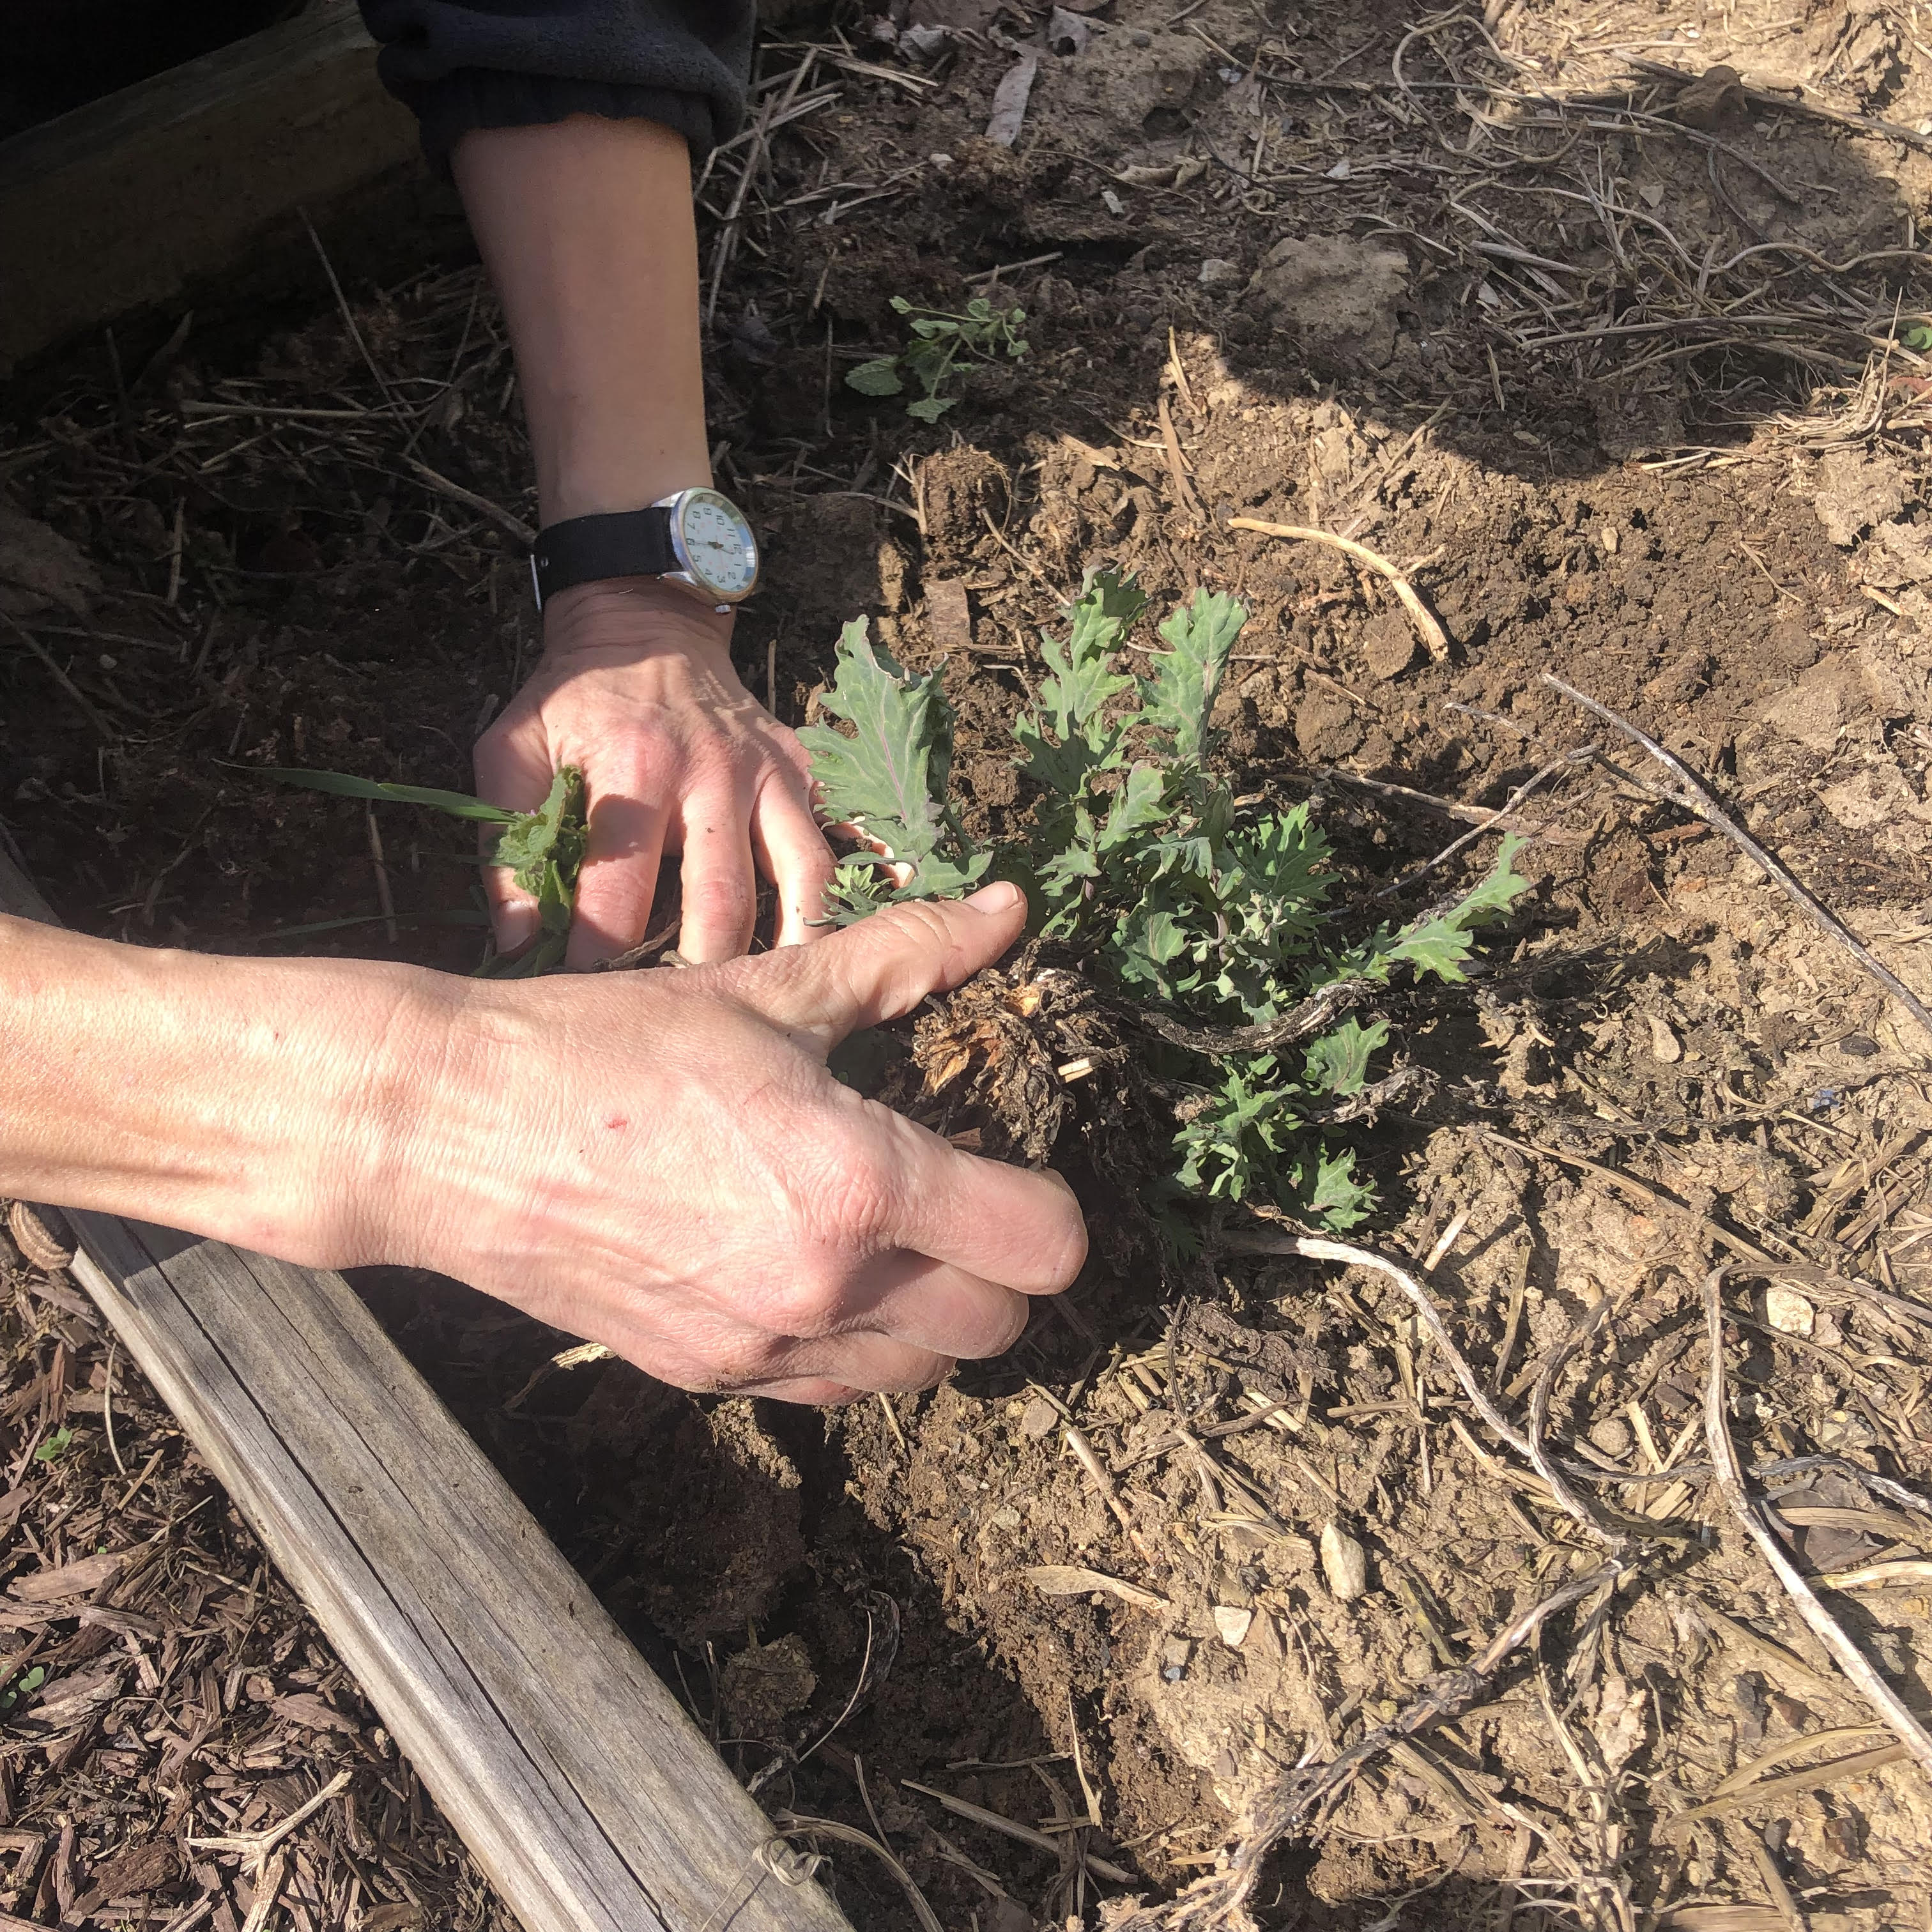 Two human hands dig in the dirt around a kale plant.